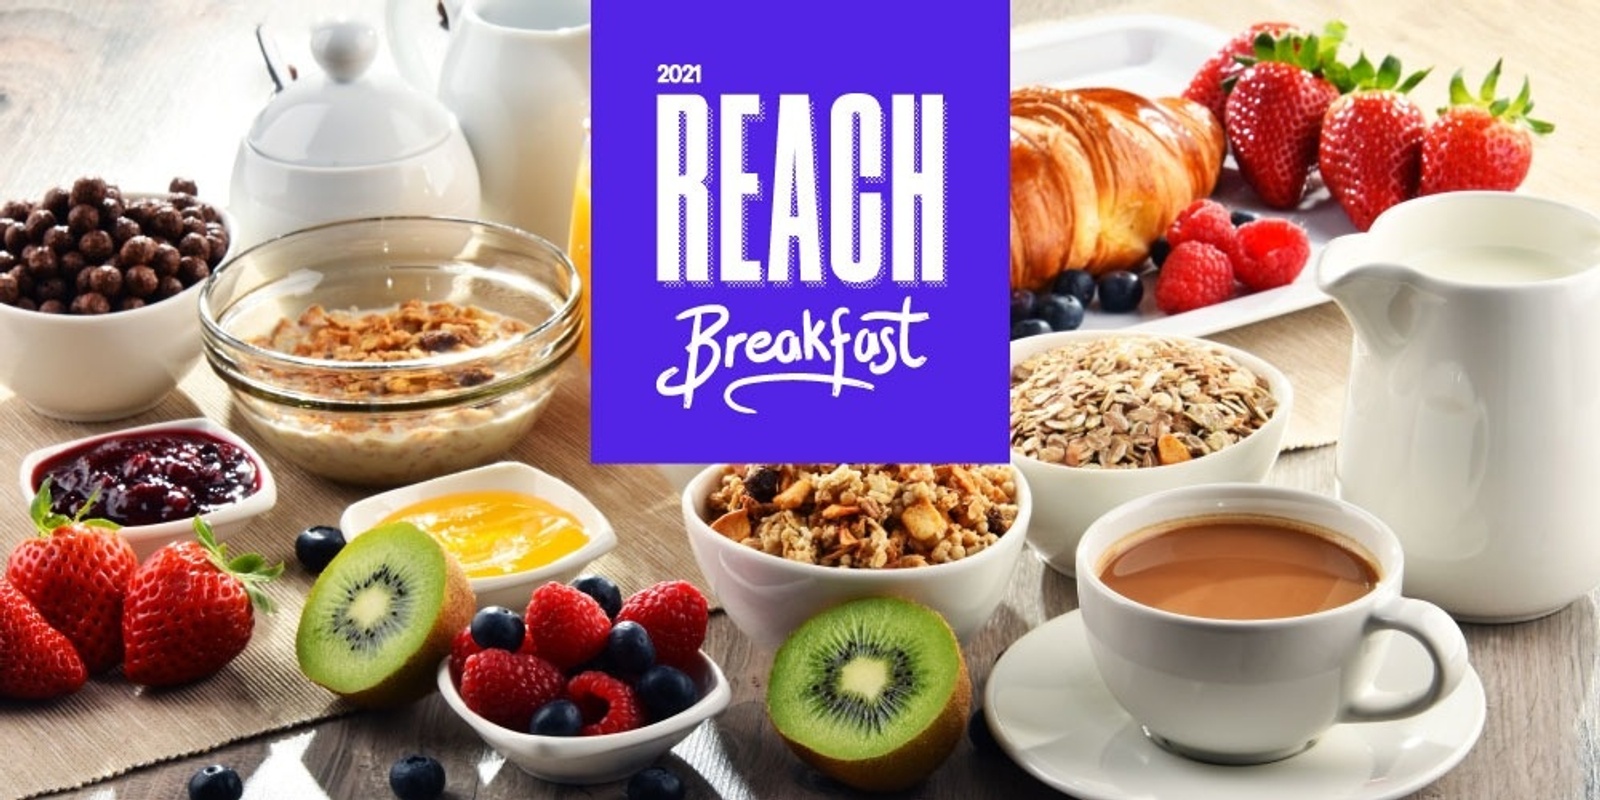 Banner image for The Reach Breakfast 2021